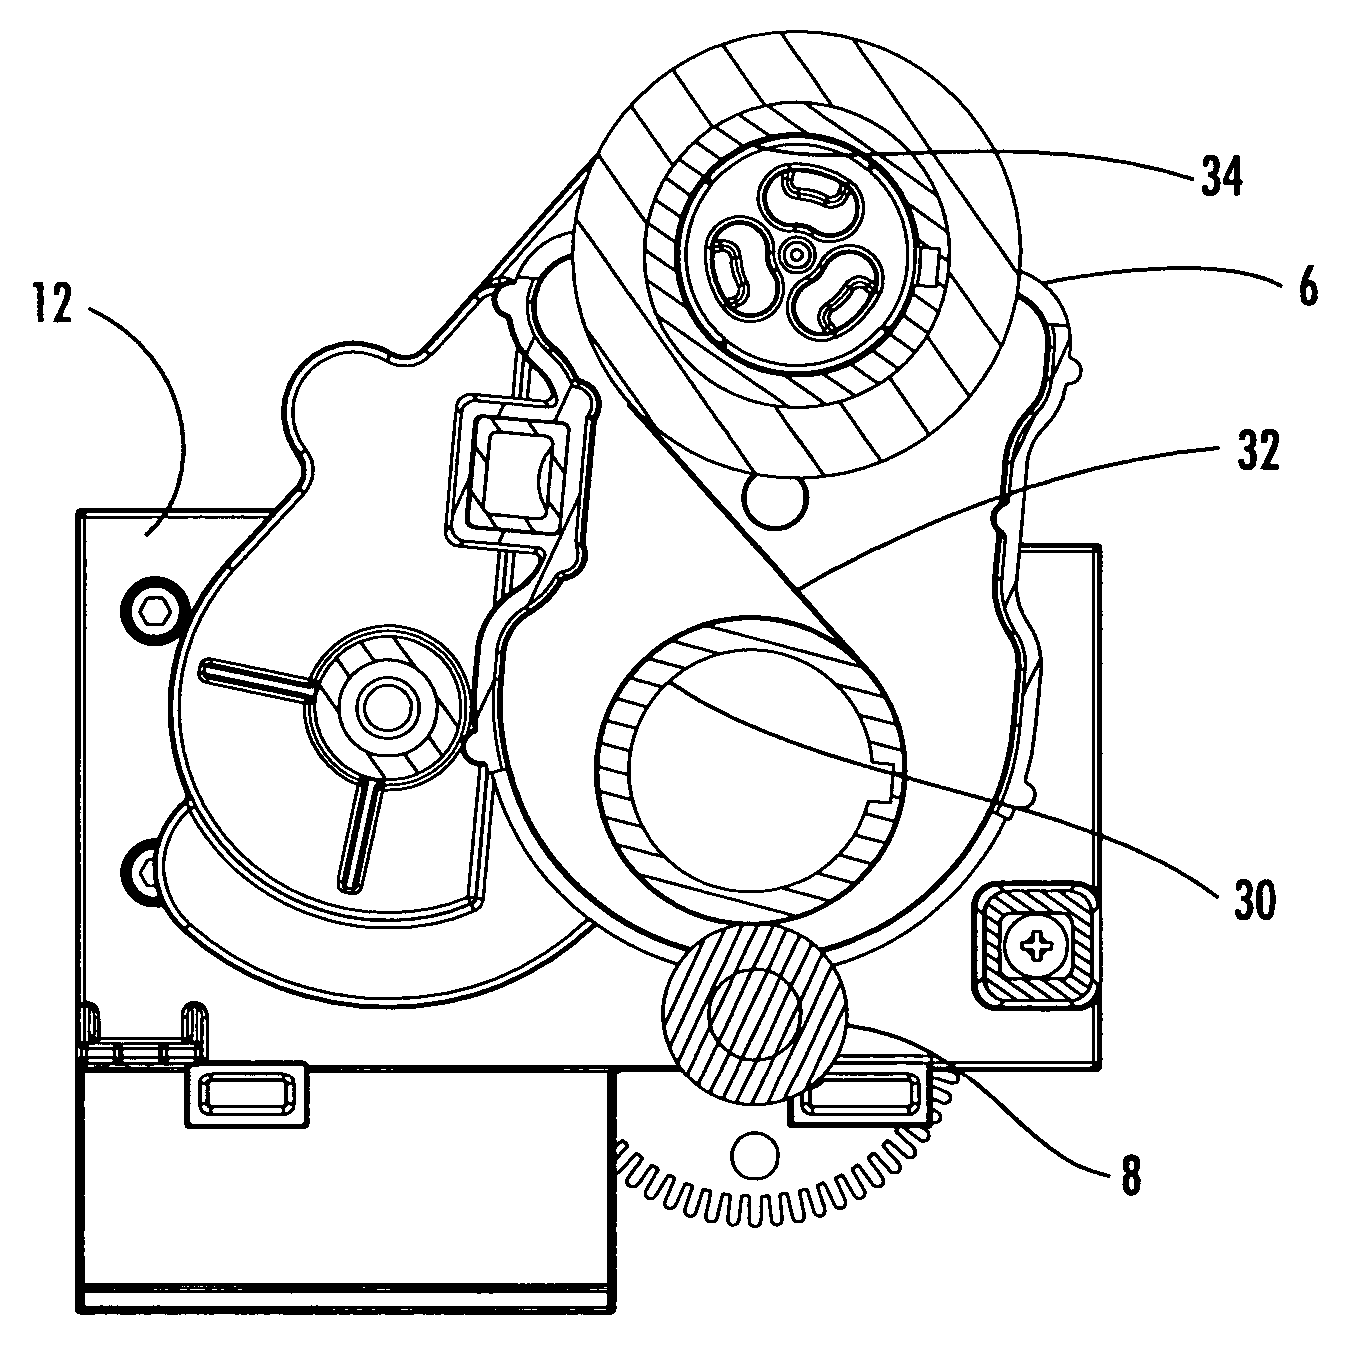 Card-cleaning assembly for card printing devices